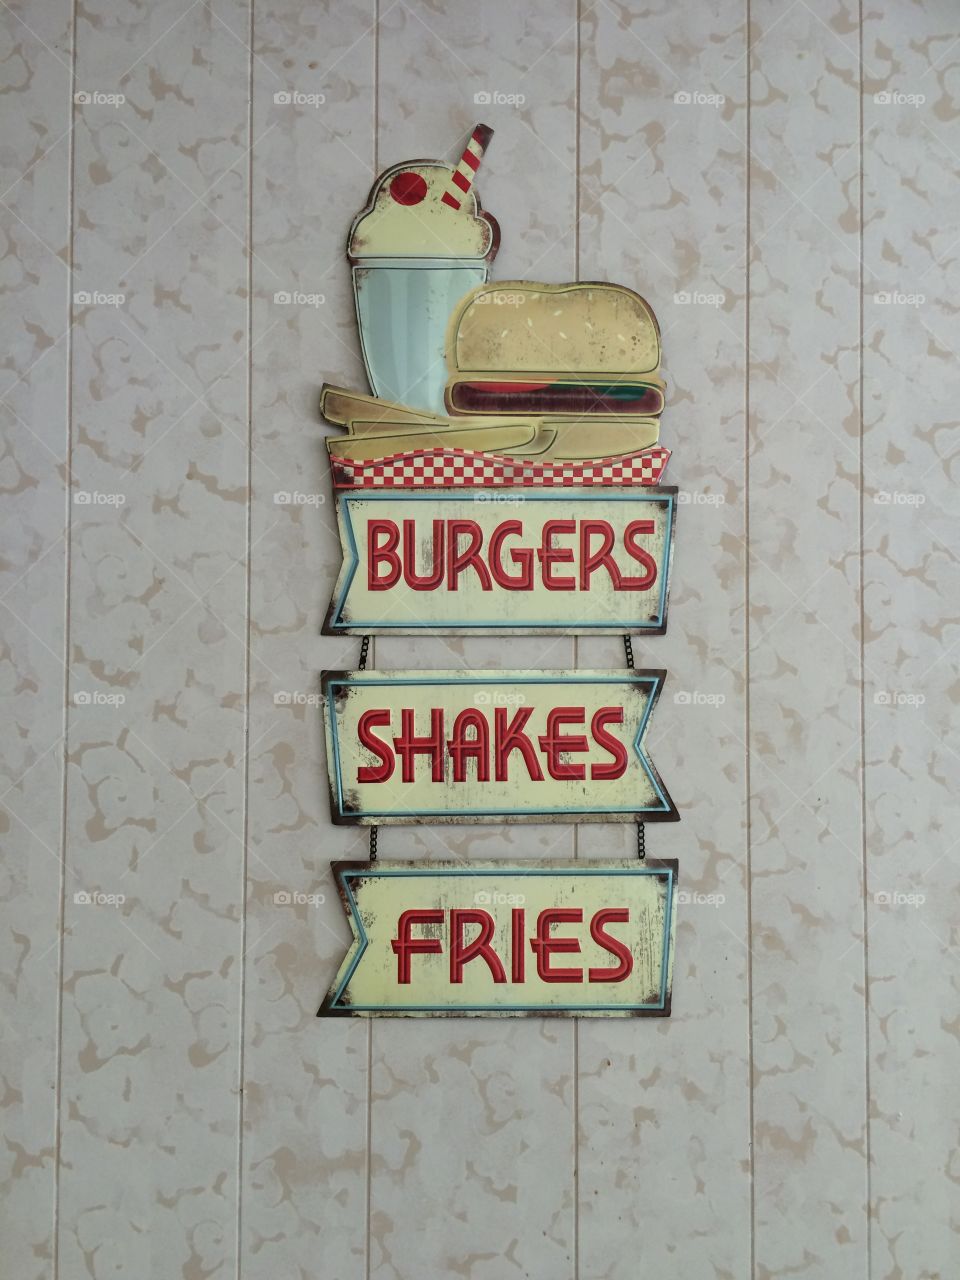 Drive-In Anyone?. You can't beat the old time burgers, shakes and fries!!!